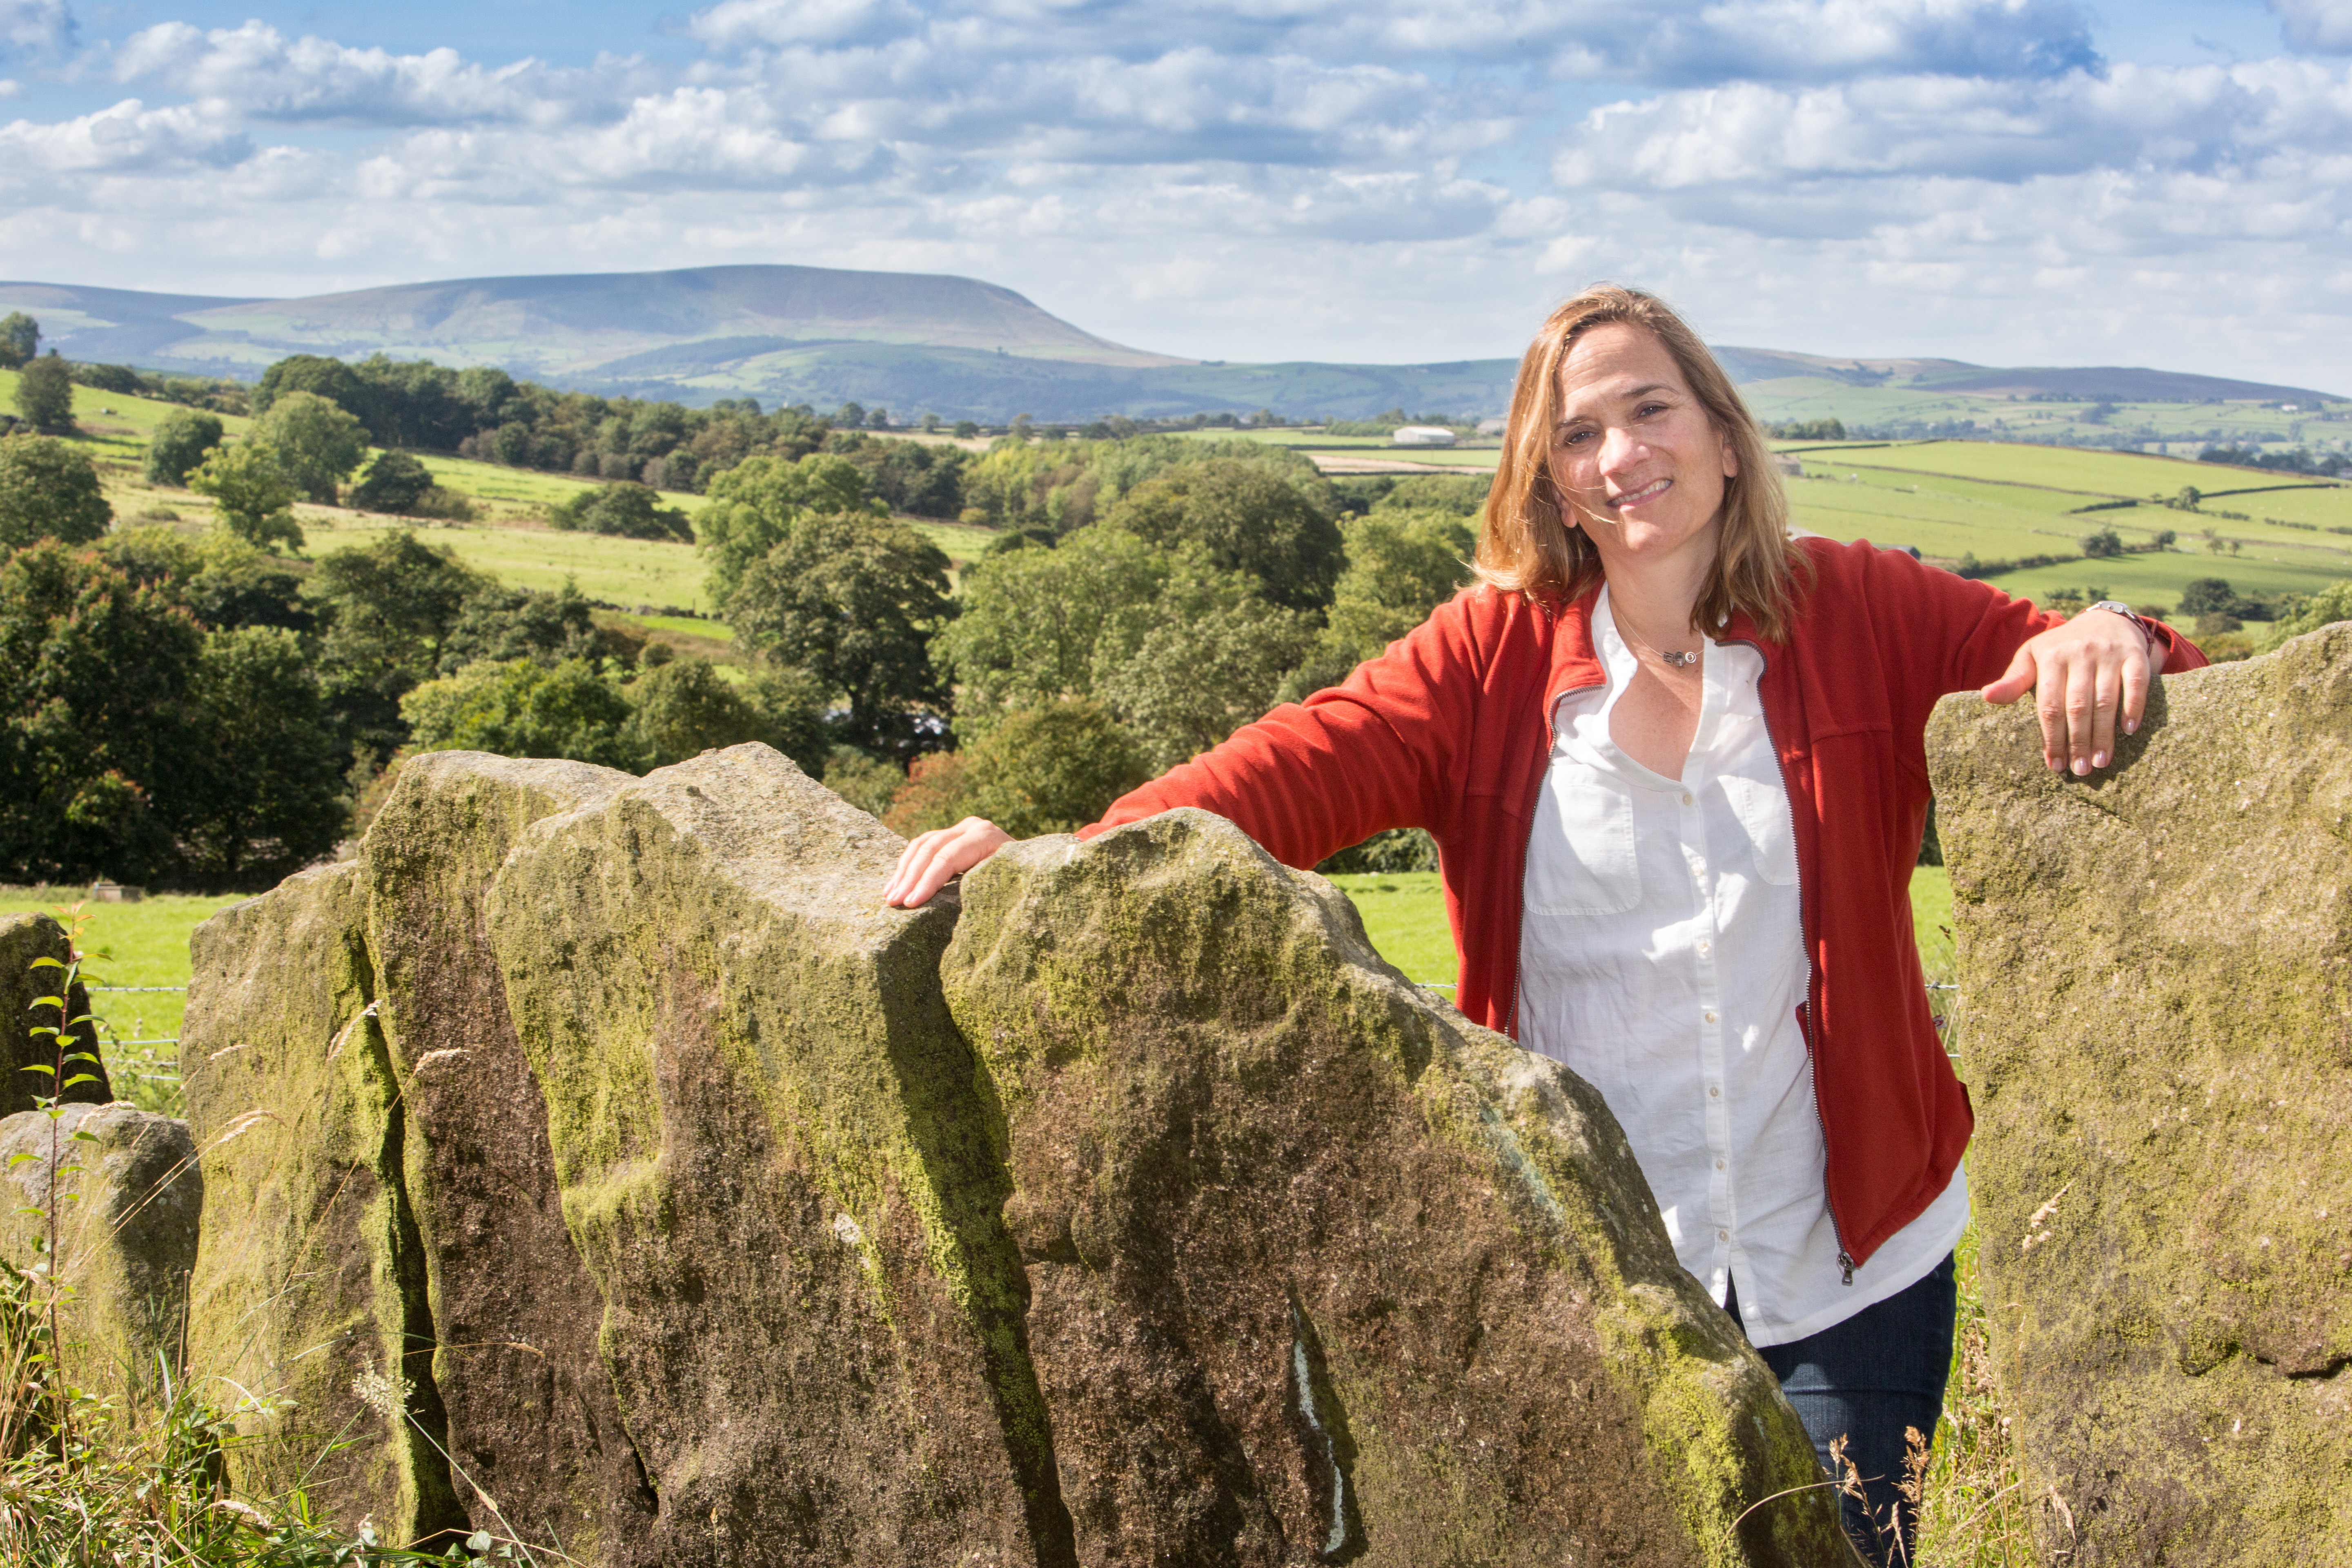 Tracy Chevalier on the old carriage track to Wycoller Hall.